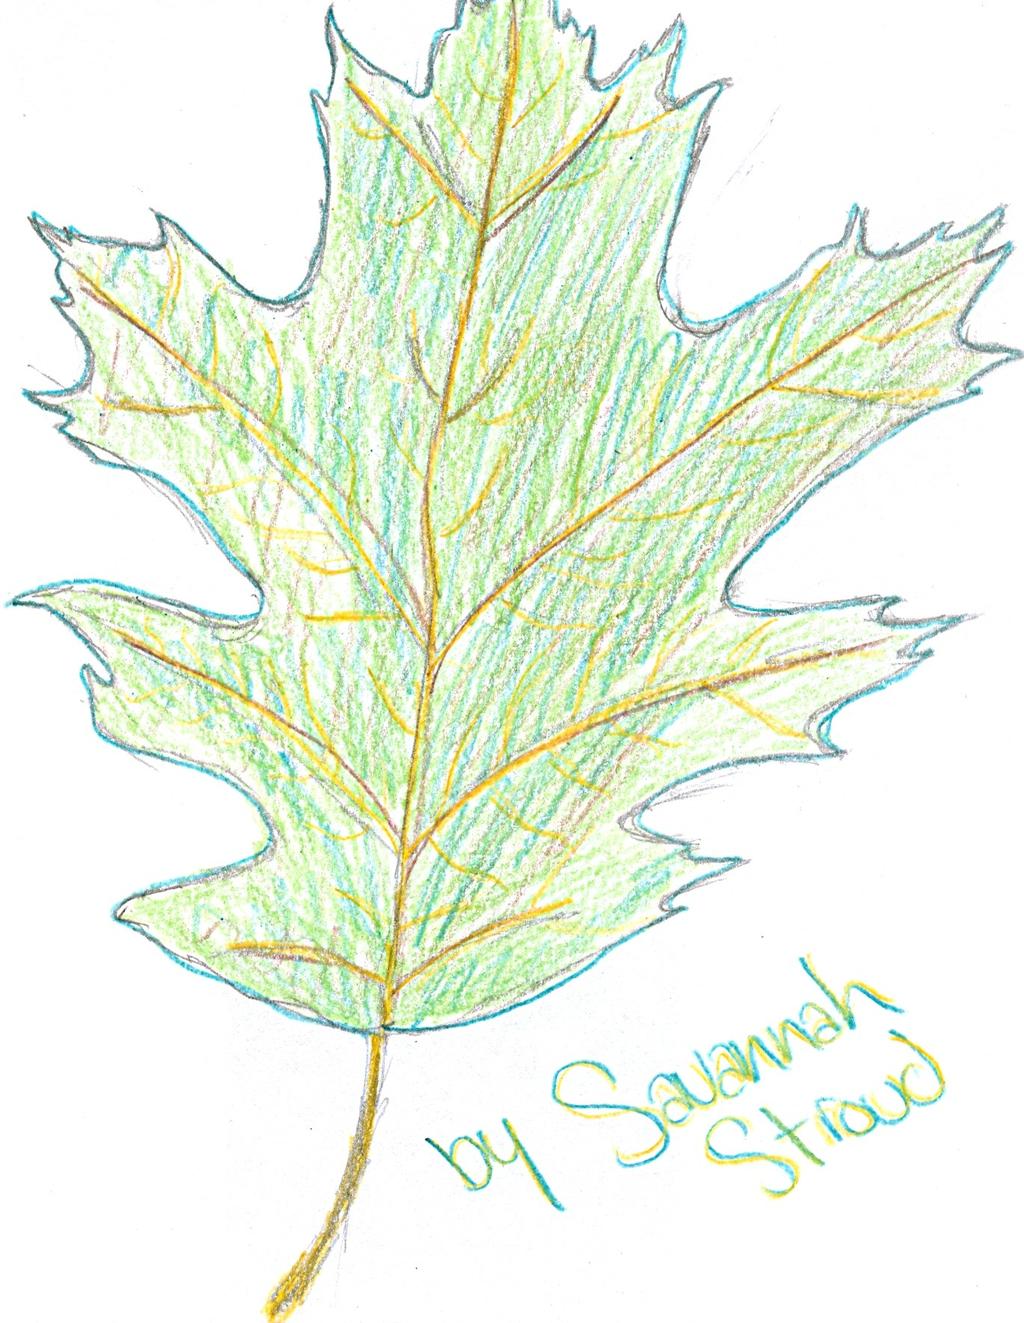 Research by Catherine Alkuino & drawing by Savannah Stroud. Northern Red Oak Most important lumber species in the Red Oak group. Scientific name, Quercus rubra, means oak red.